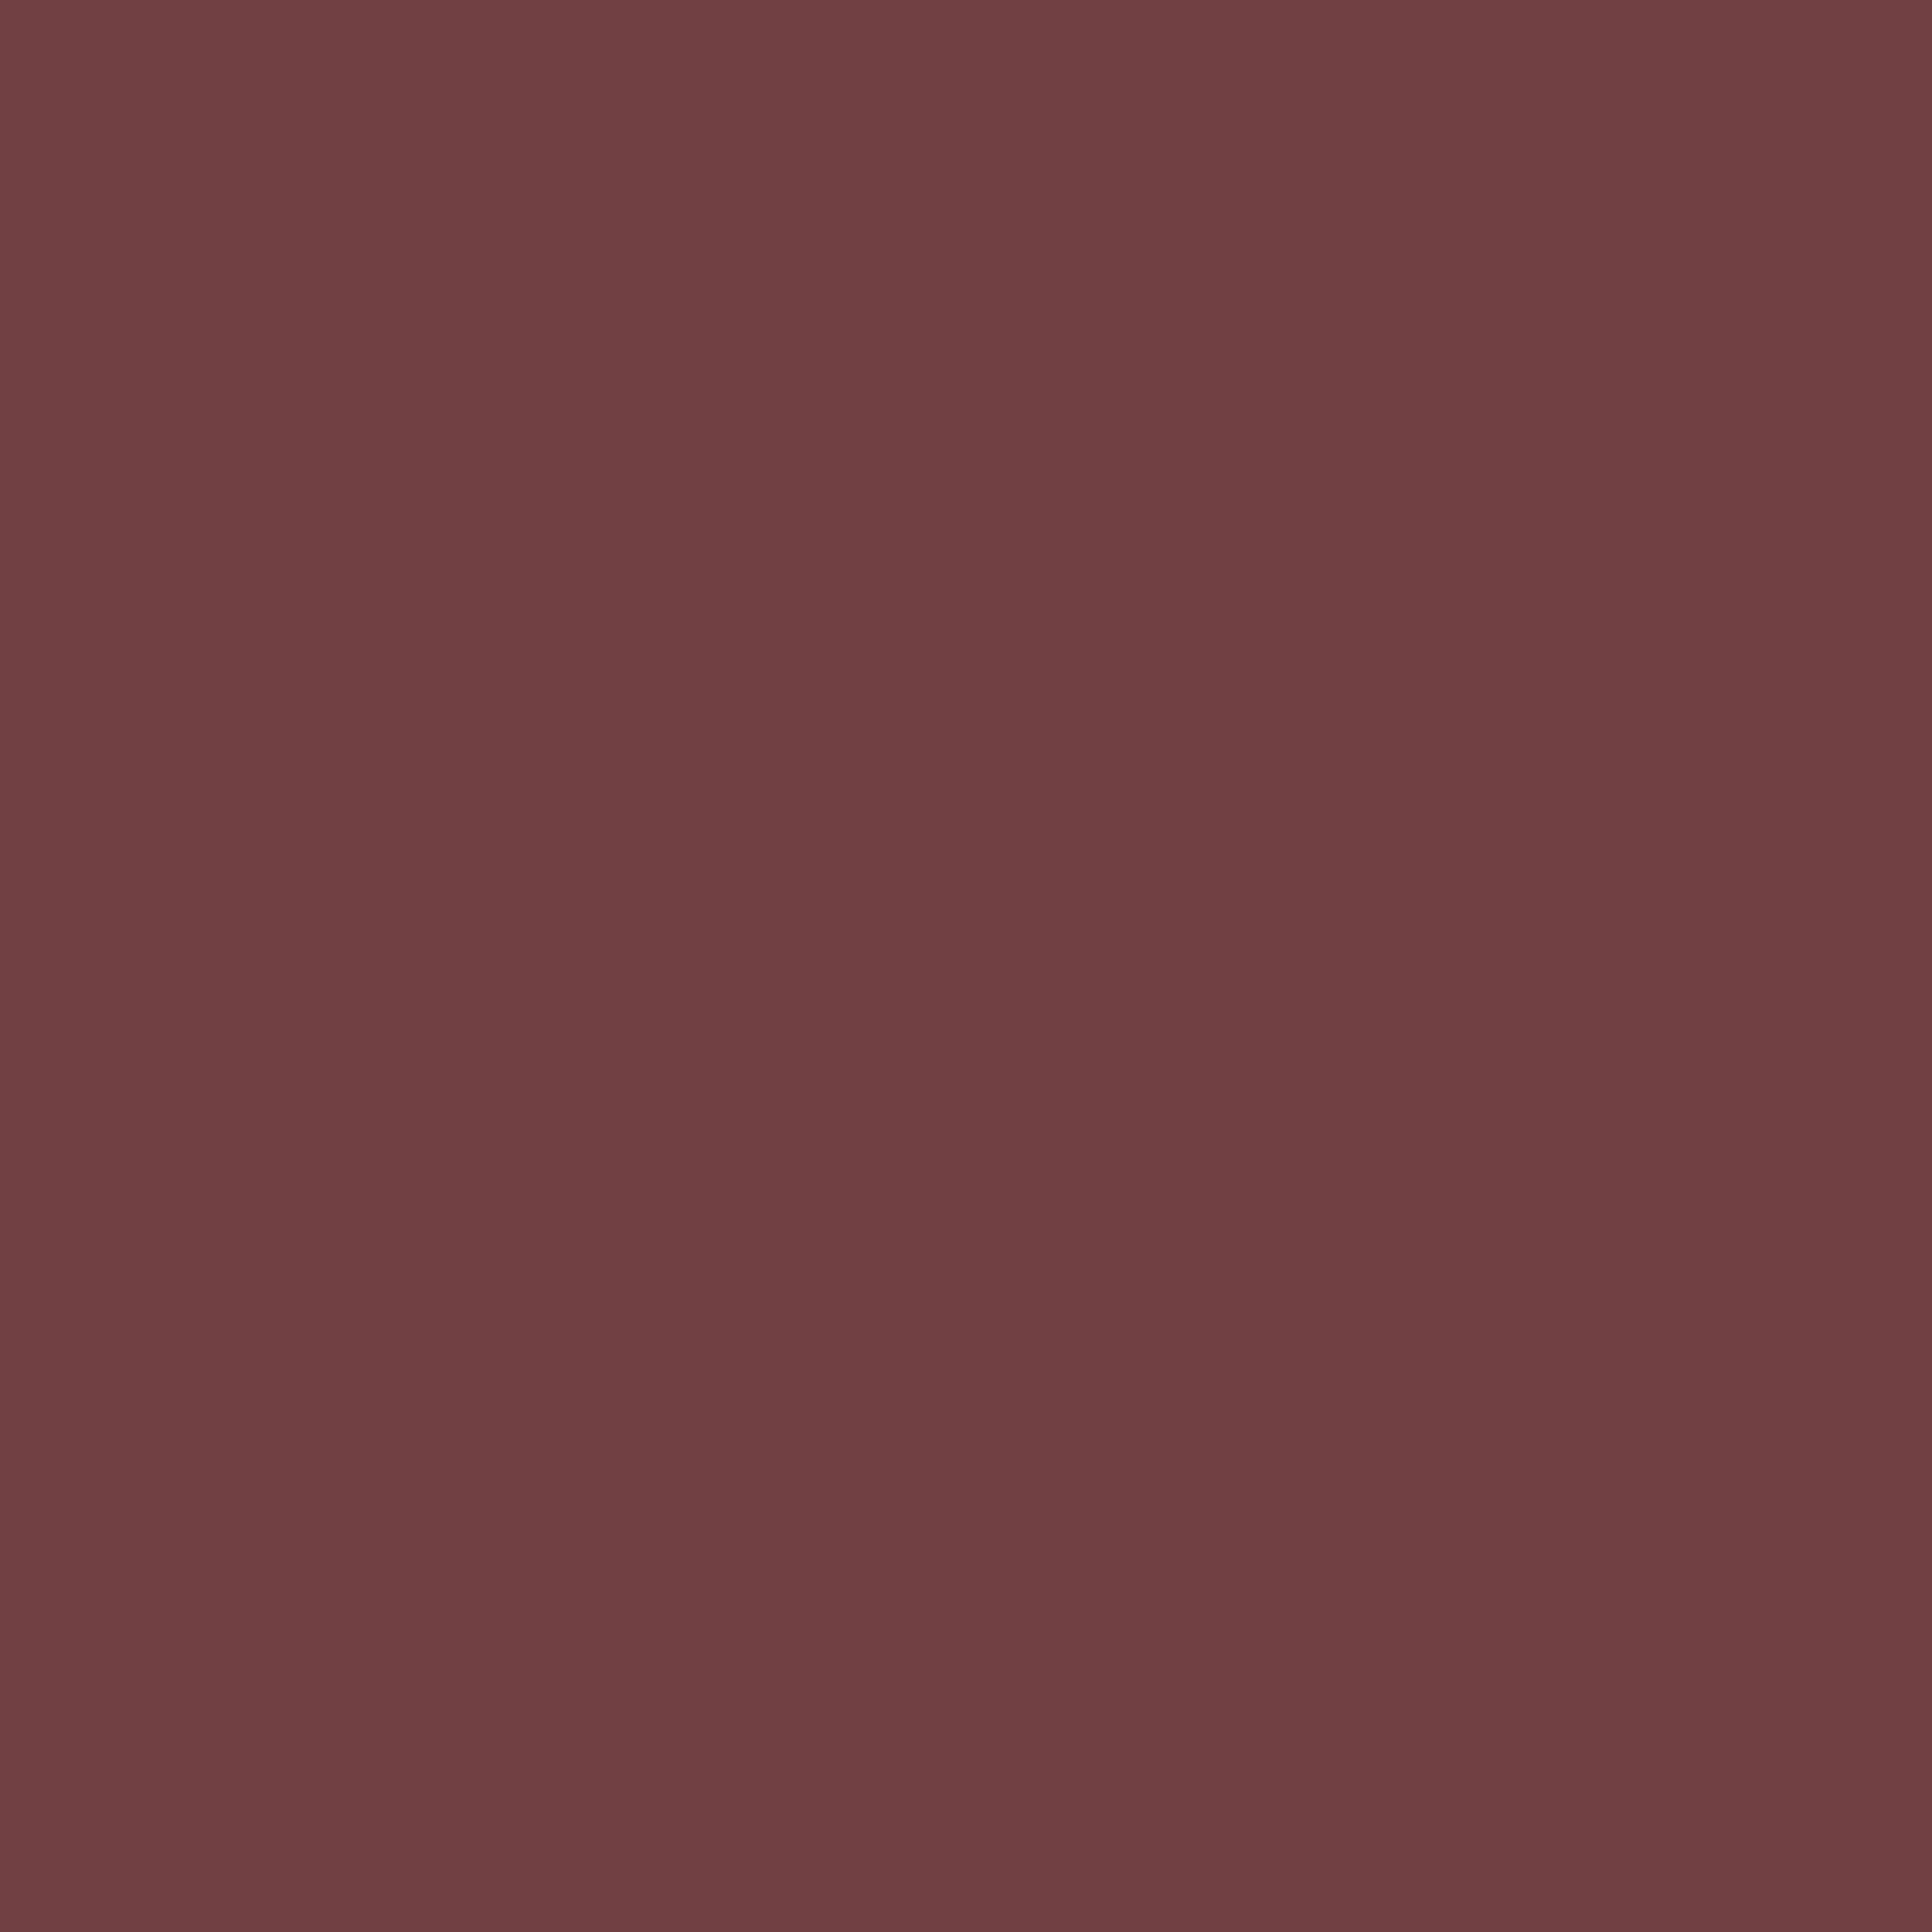 2732x2732 Deep Coffee Solid Color Background